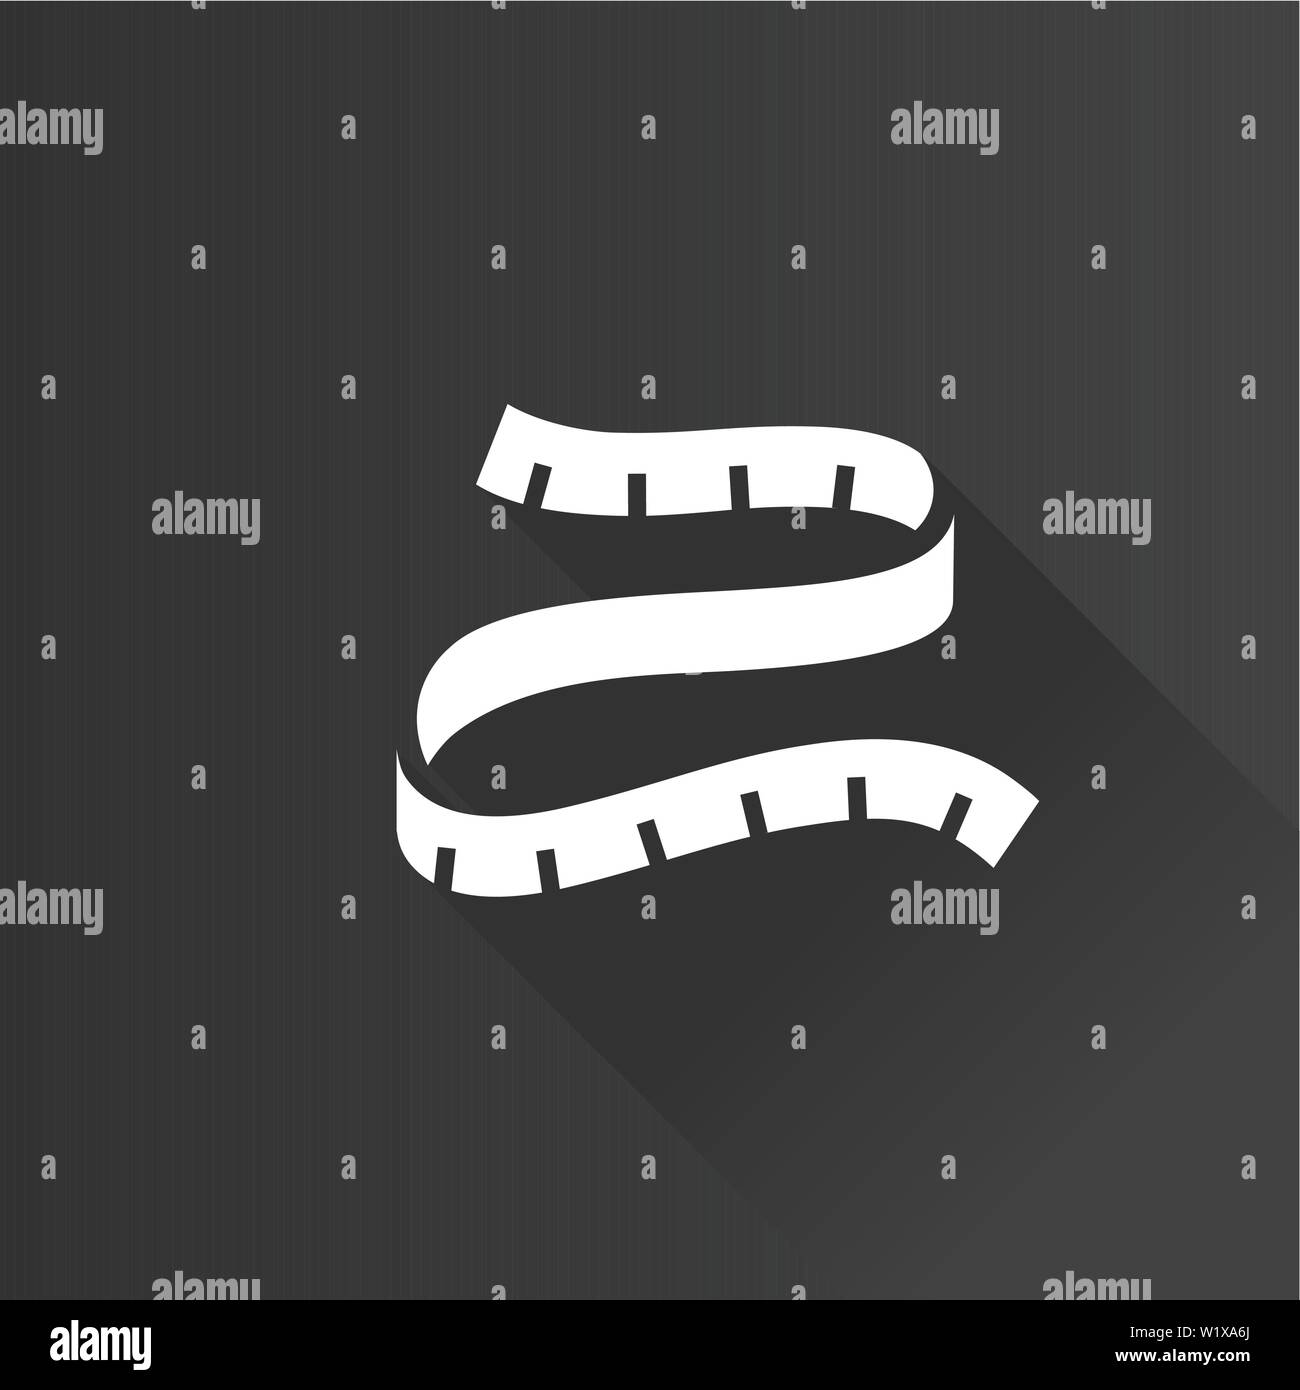 Sewing measure tape Black and White Stock Photos & Images - Alamy